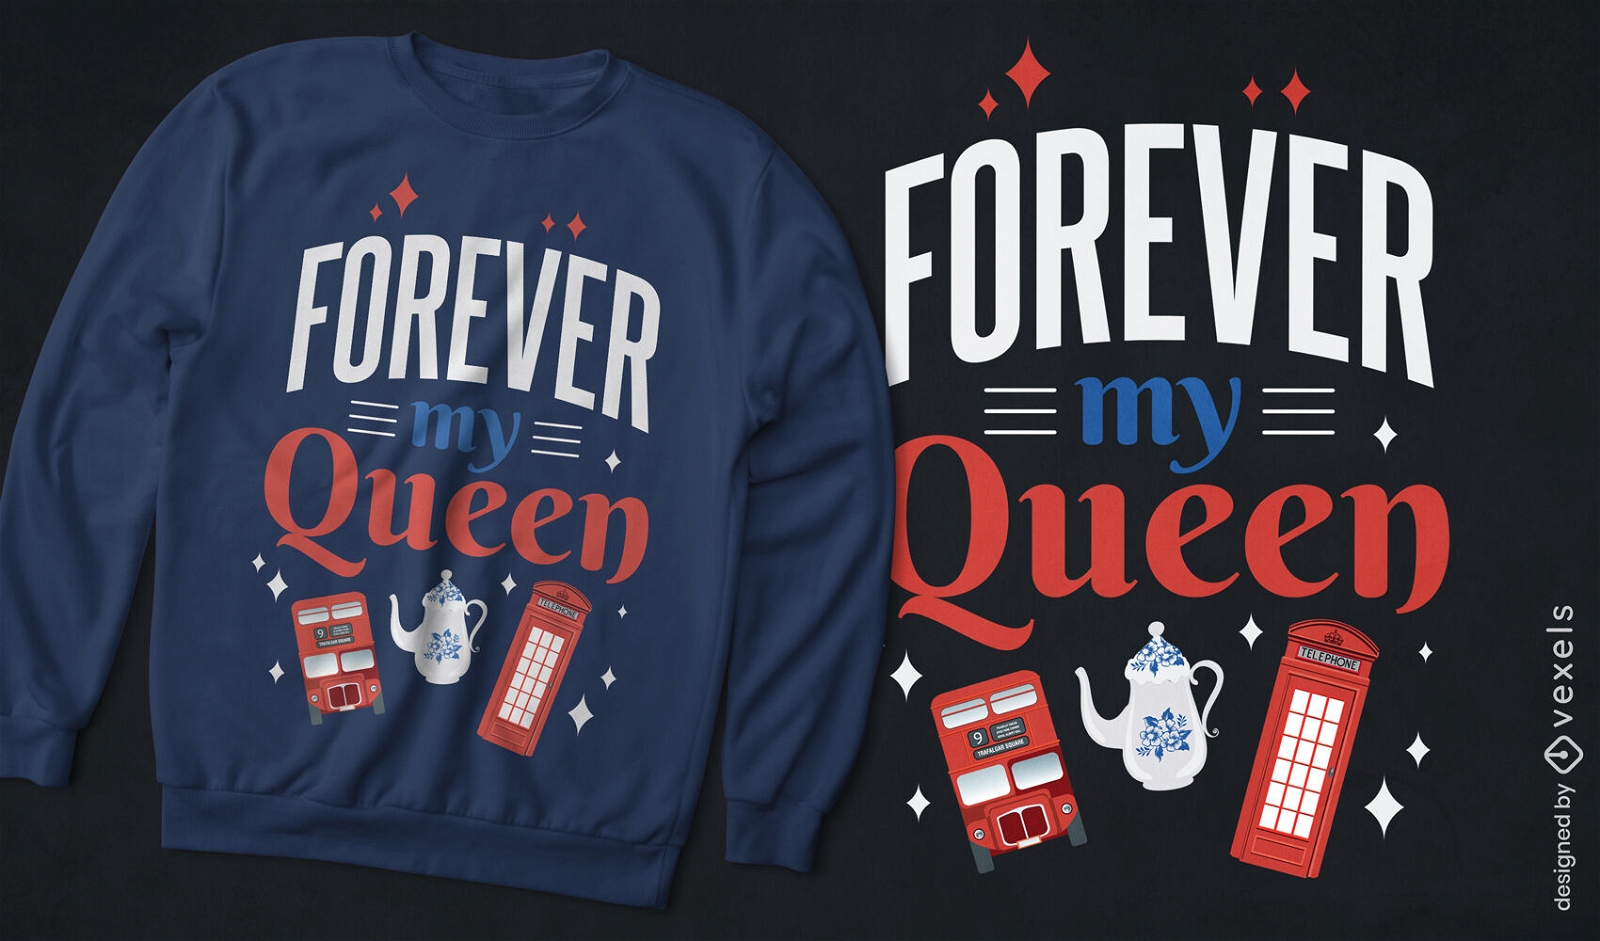 Forever my queen quote t-shirt design